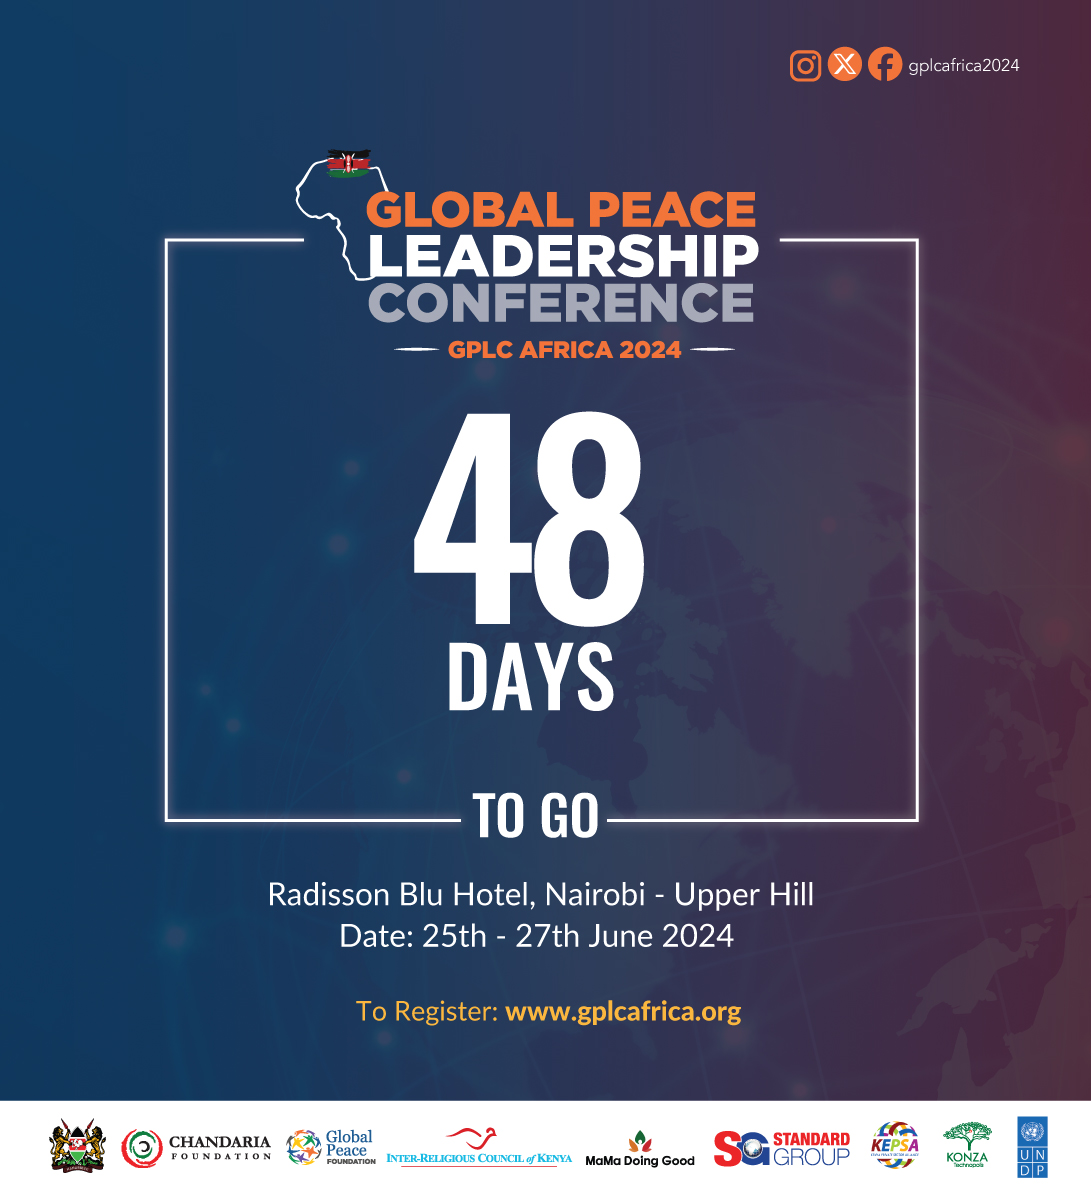 Just 48 days until GPLC Africa 2024! 🌍 We're counting down to a landmark event in Nairobi, where we'll explore new pathways to peace and sustainable development. Get ready to connect with leaders, innovators, and changemakers across Africa and beyond. #GPLCAfrica2024